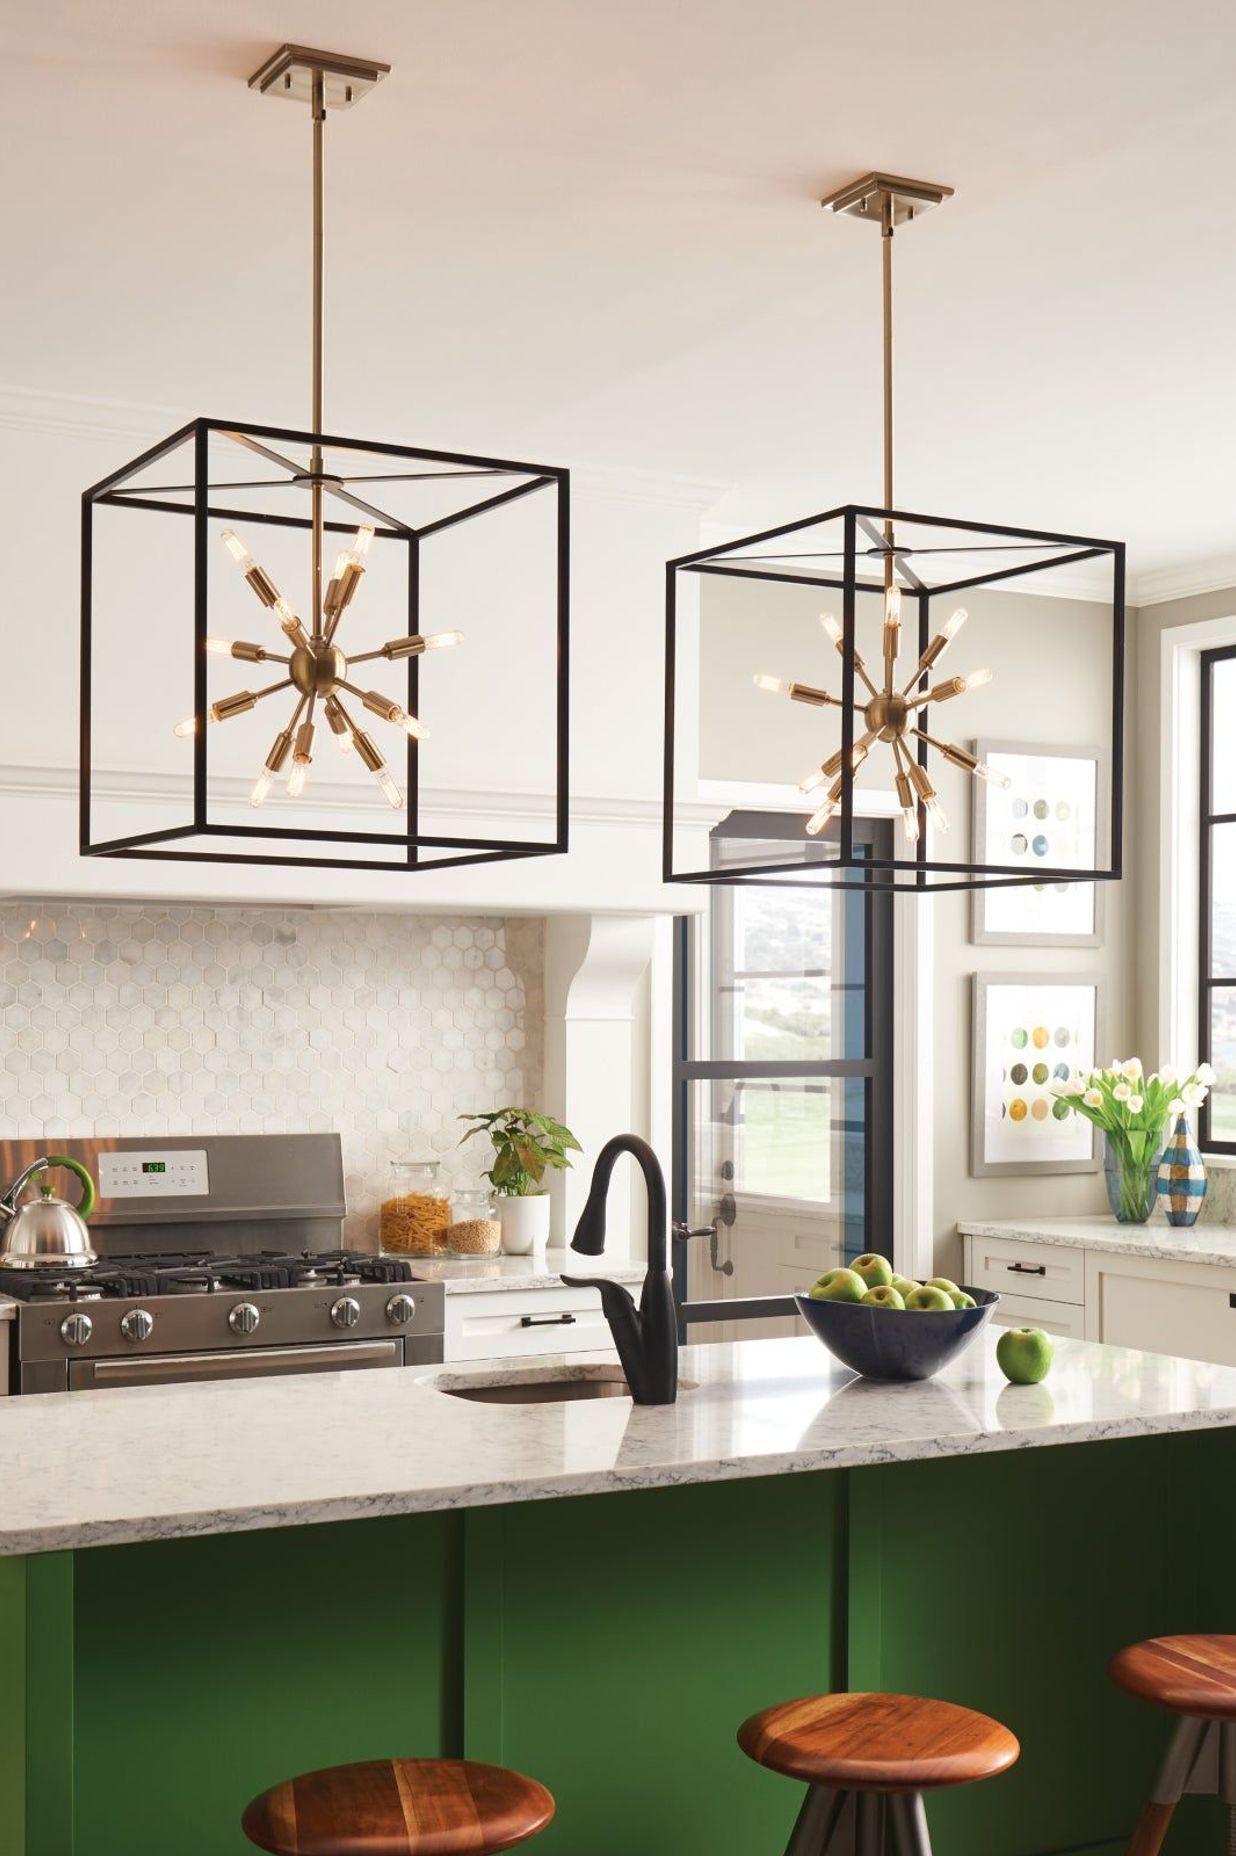 These pendant lights look great alongside the kitchens neutral tones. Featured product: Aros Collection by Urban Lighting.